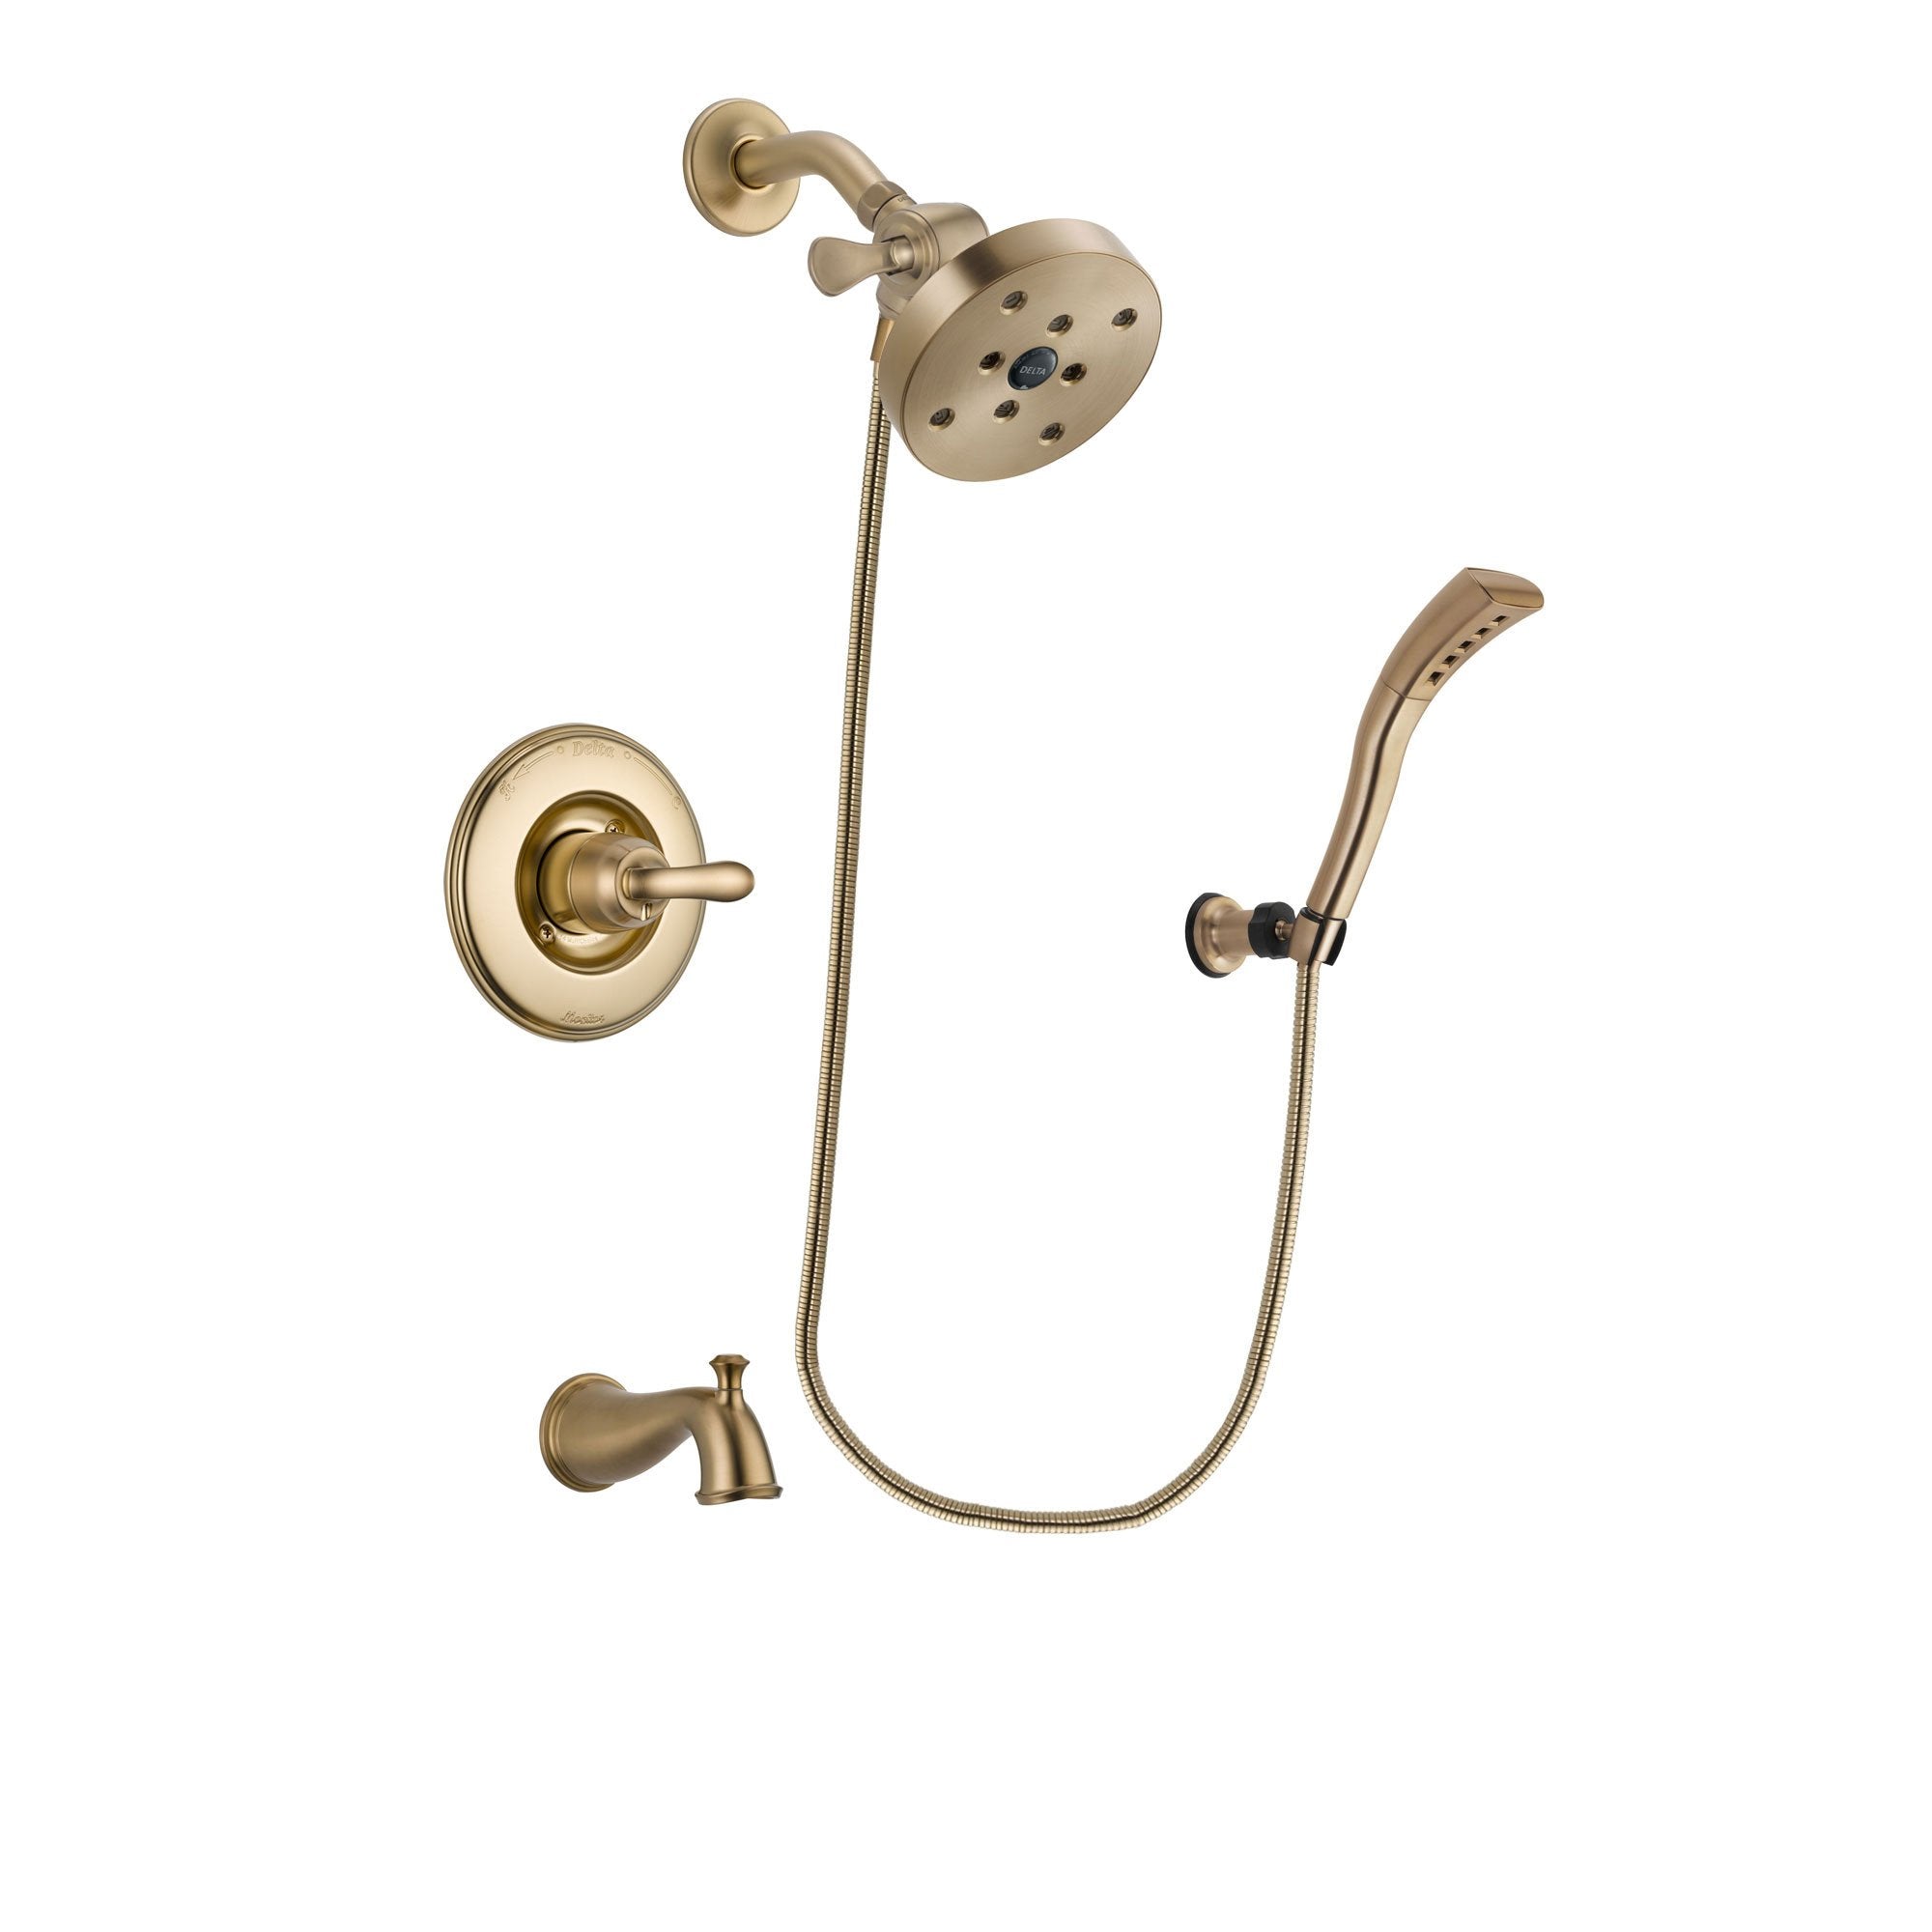 Delta Linden Champagne Bronze Finish Tub and Shower Faucet System Package with 5-1/2 inch Showerhead and Modern Wall Mount Personal Handheld Shower Spray Includes Rough-in Valve and Tub Spout DSP3721V